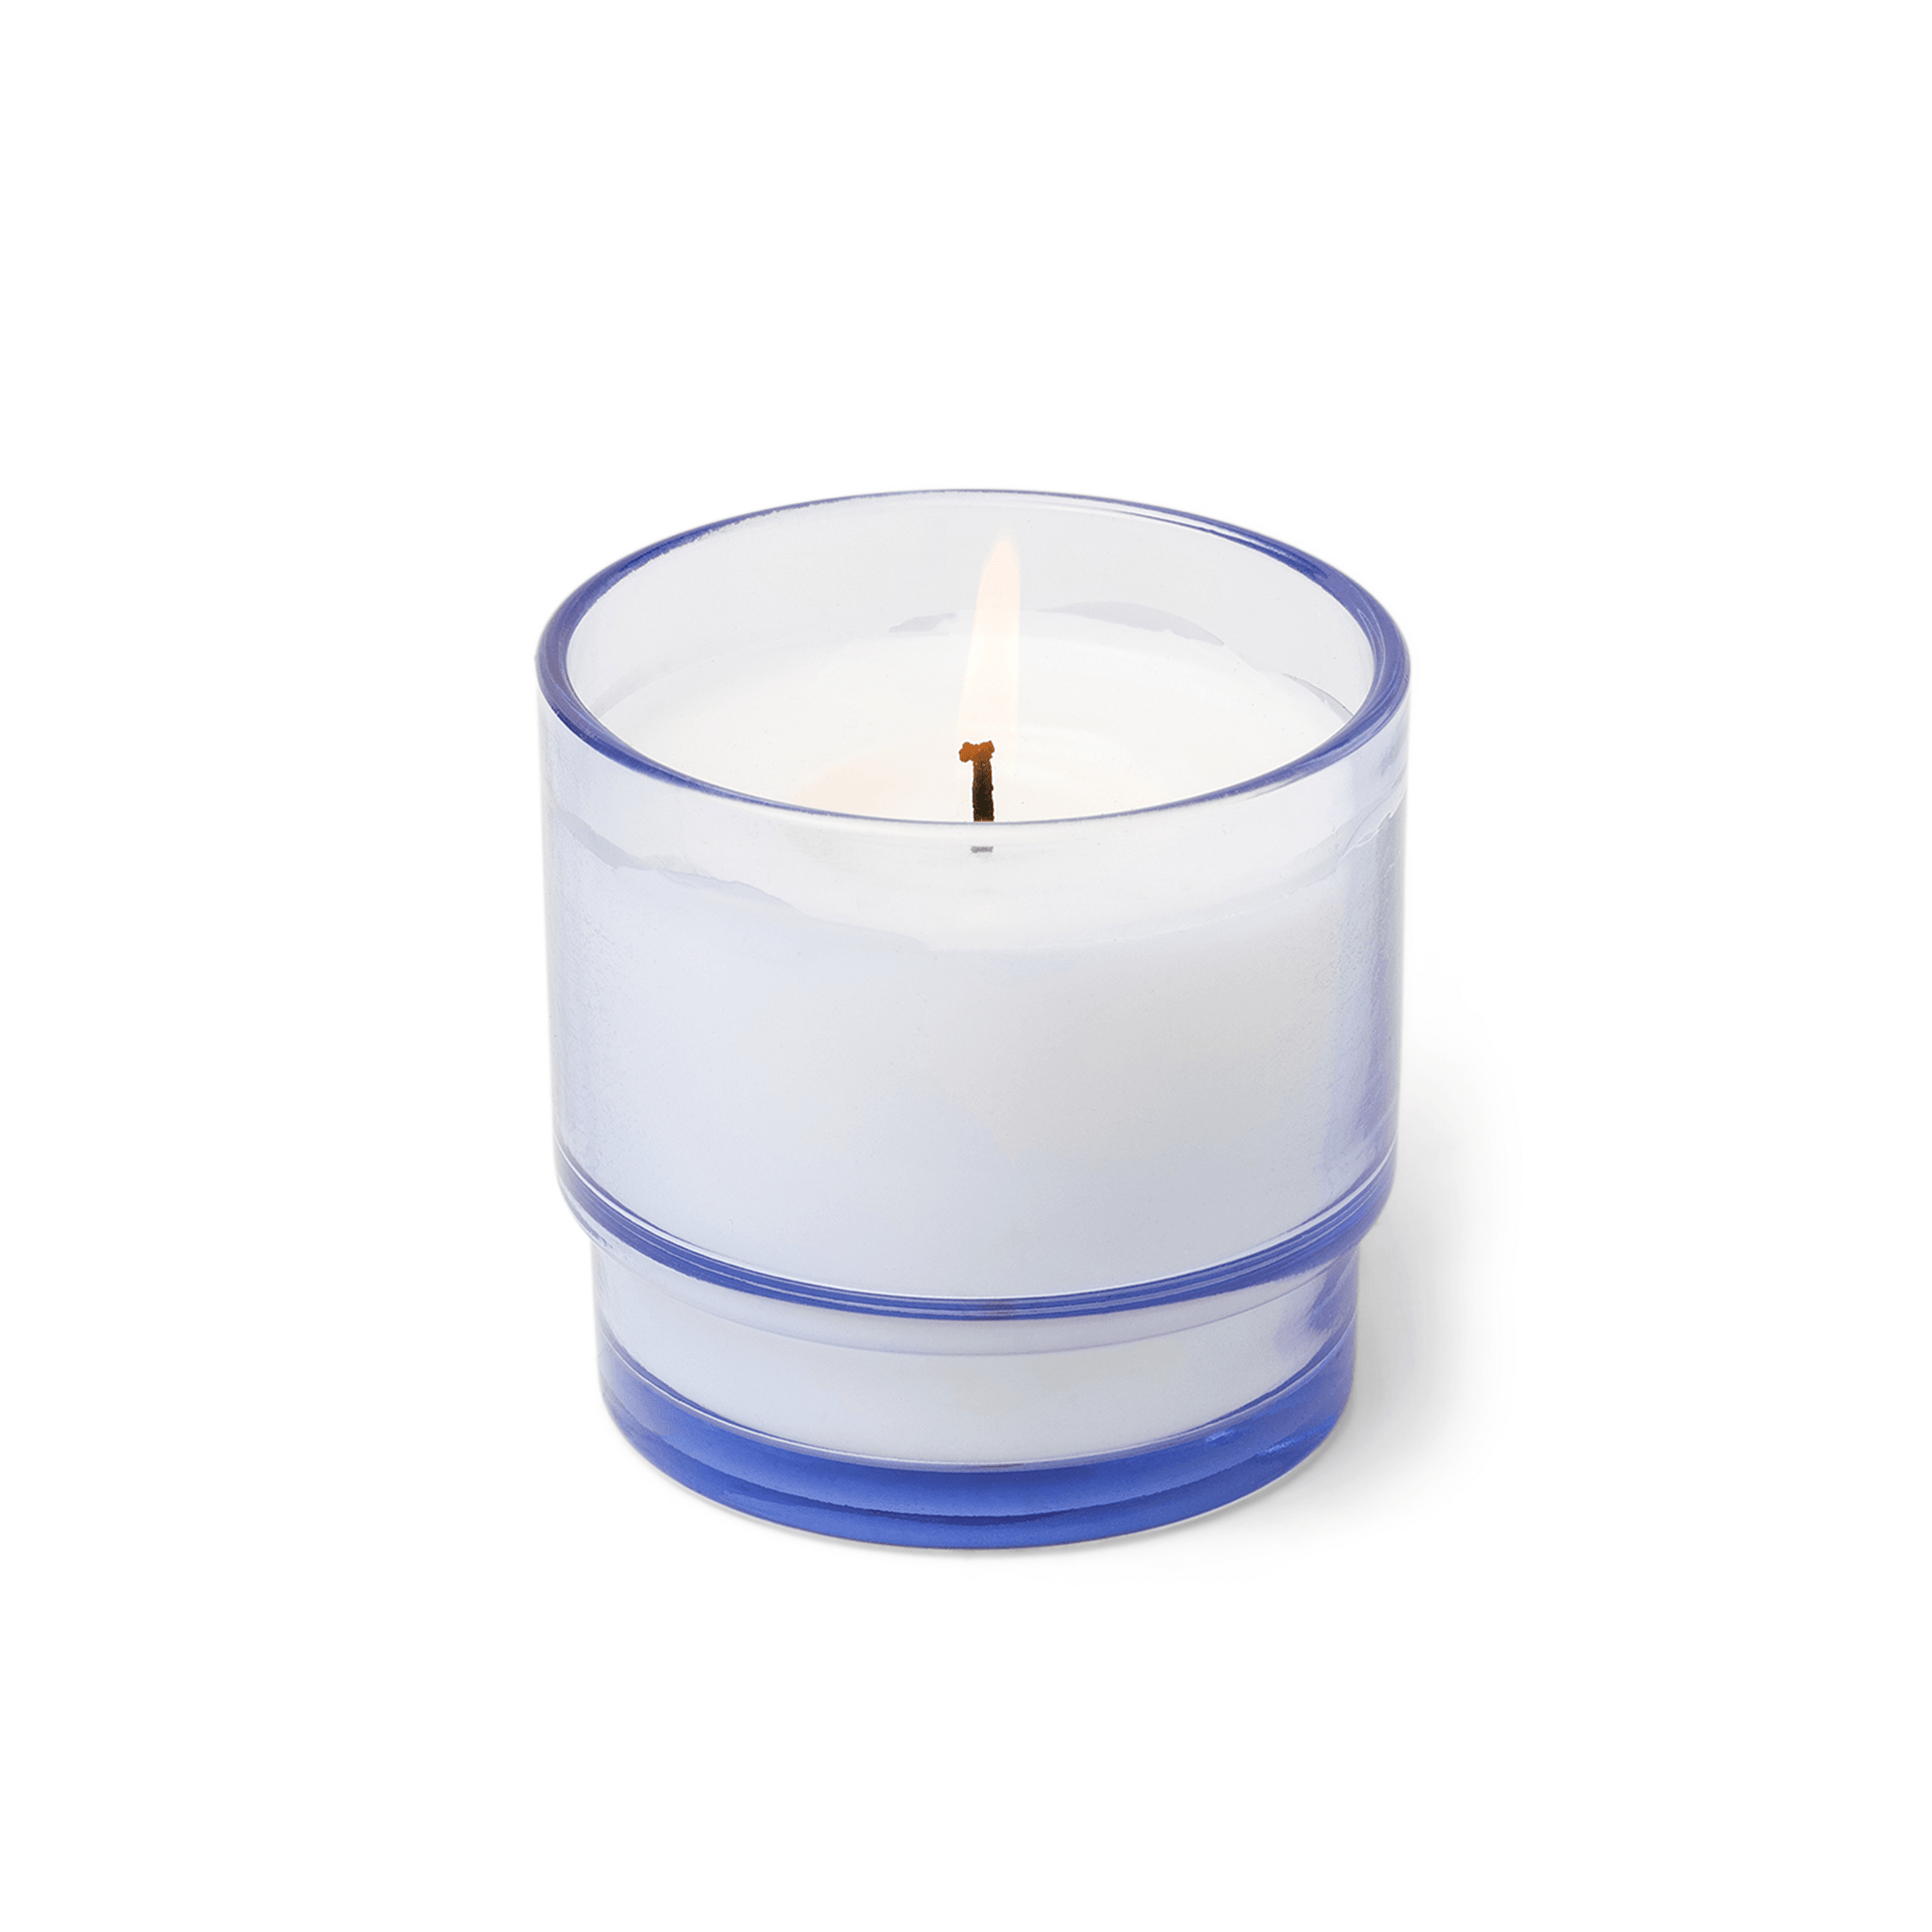 7 oz candle in glass vessel tinted blue; white wax; one wick; a part of the Al Fresco collection